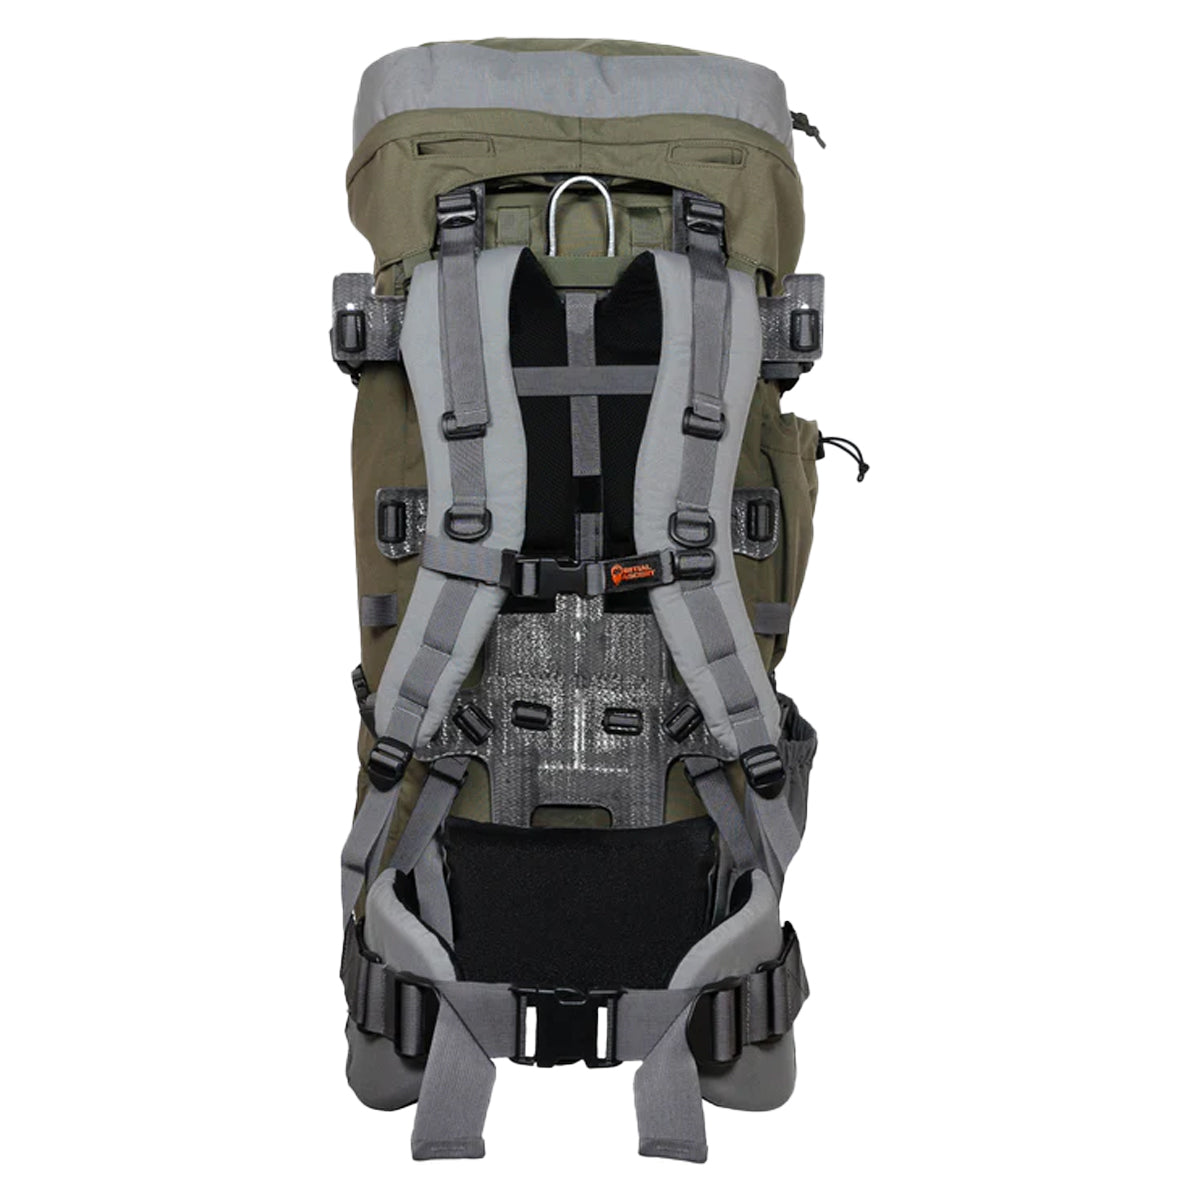 Initial Ascent 3K Backpack in  by GOHUNT | Initial Ascent - GOHUNT Shop